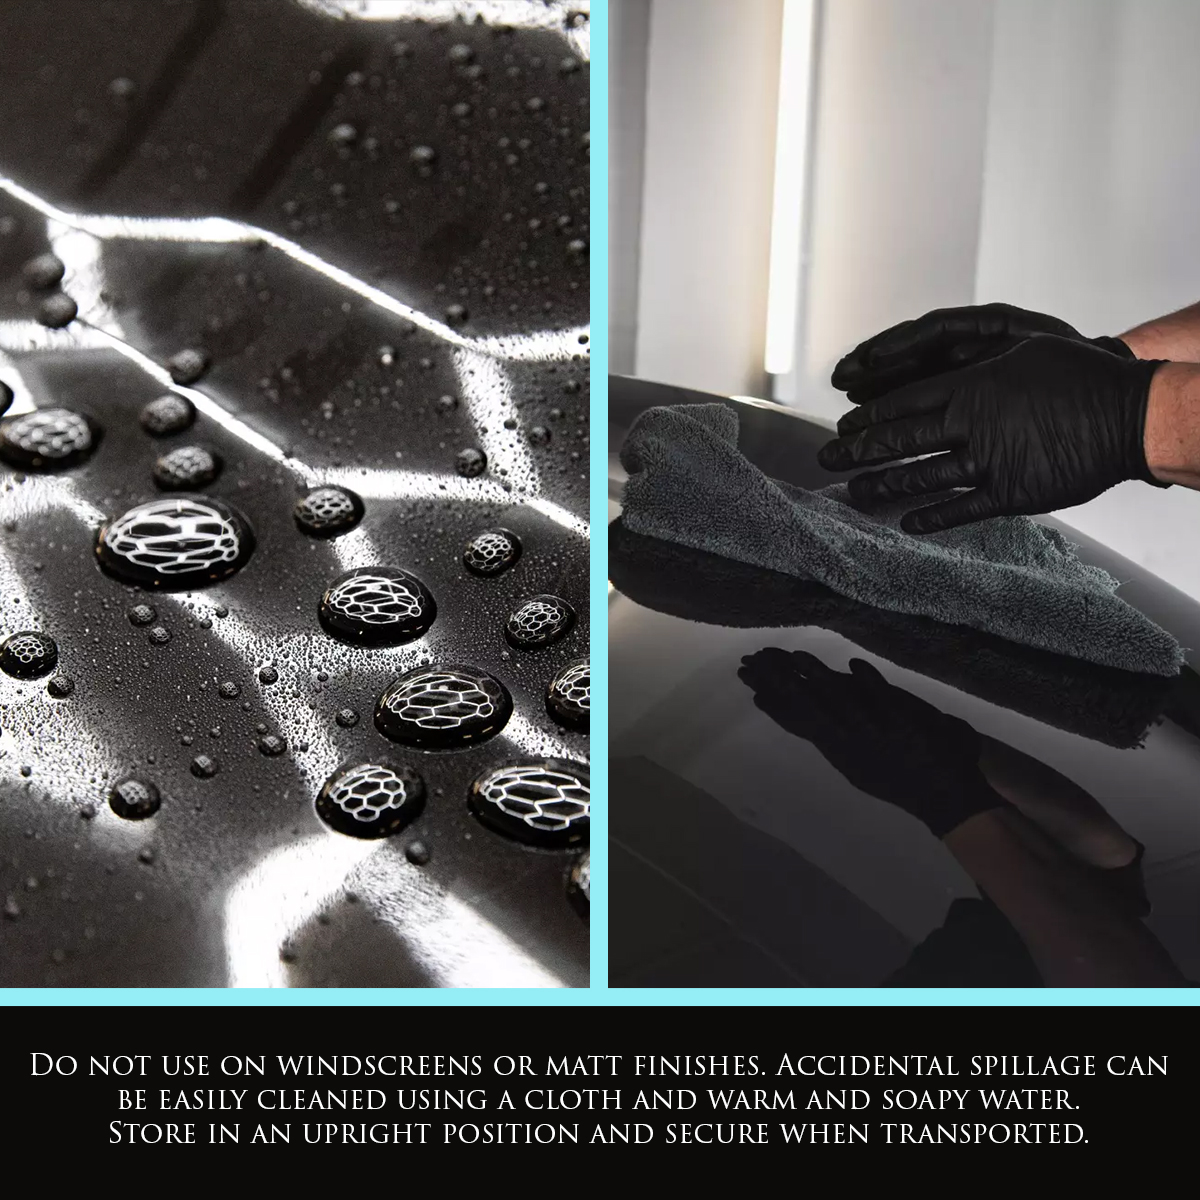 Left image shows Car Gods Ceramic SiO2 Hybrid Wax Spray being sprayed onto a black vehicle, the right image shows the solution being buffed off the vehicle surface with a grey microfibre cloth. Text: Do not use on windscreens or matt finishes. Accidental spillage can be easily cleaned using a cloth and water. Store in an upright position and secure when transported.